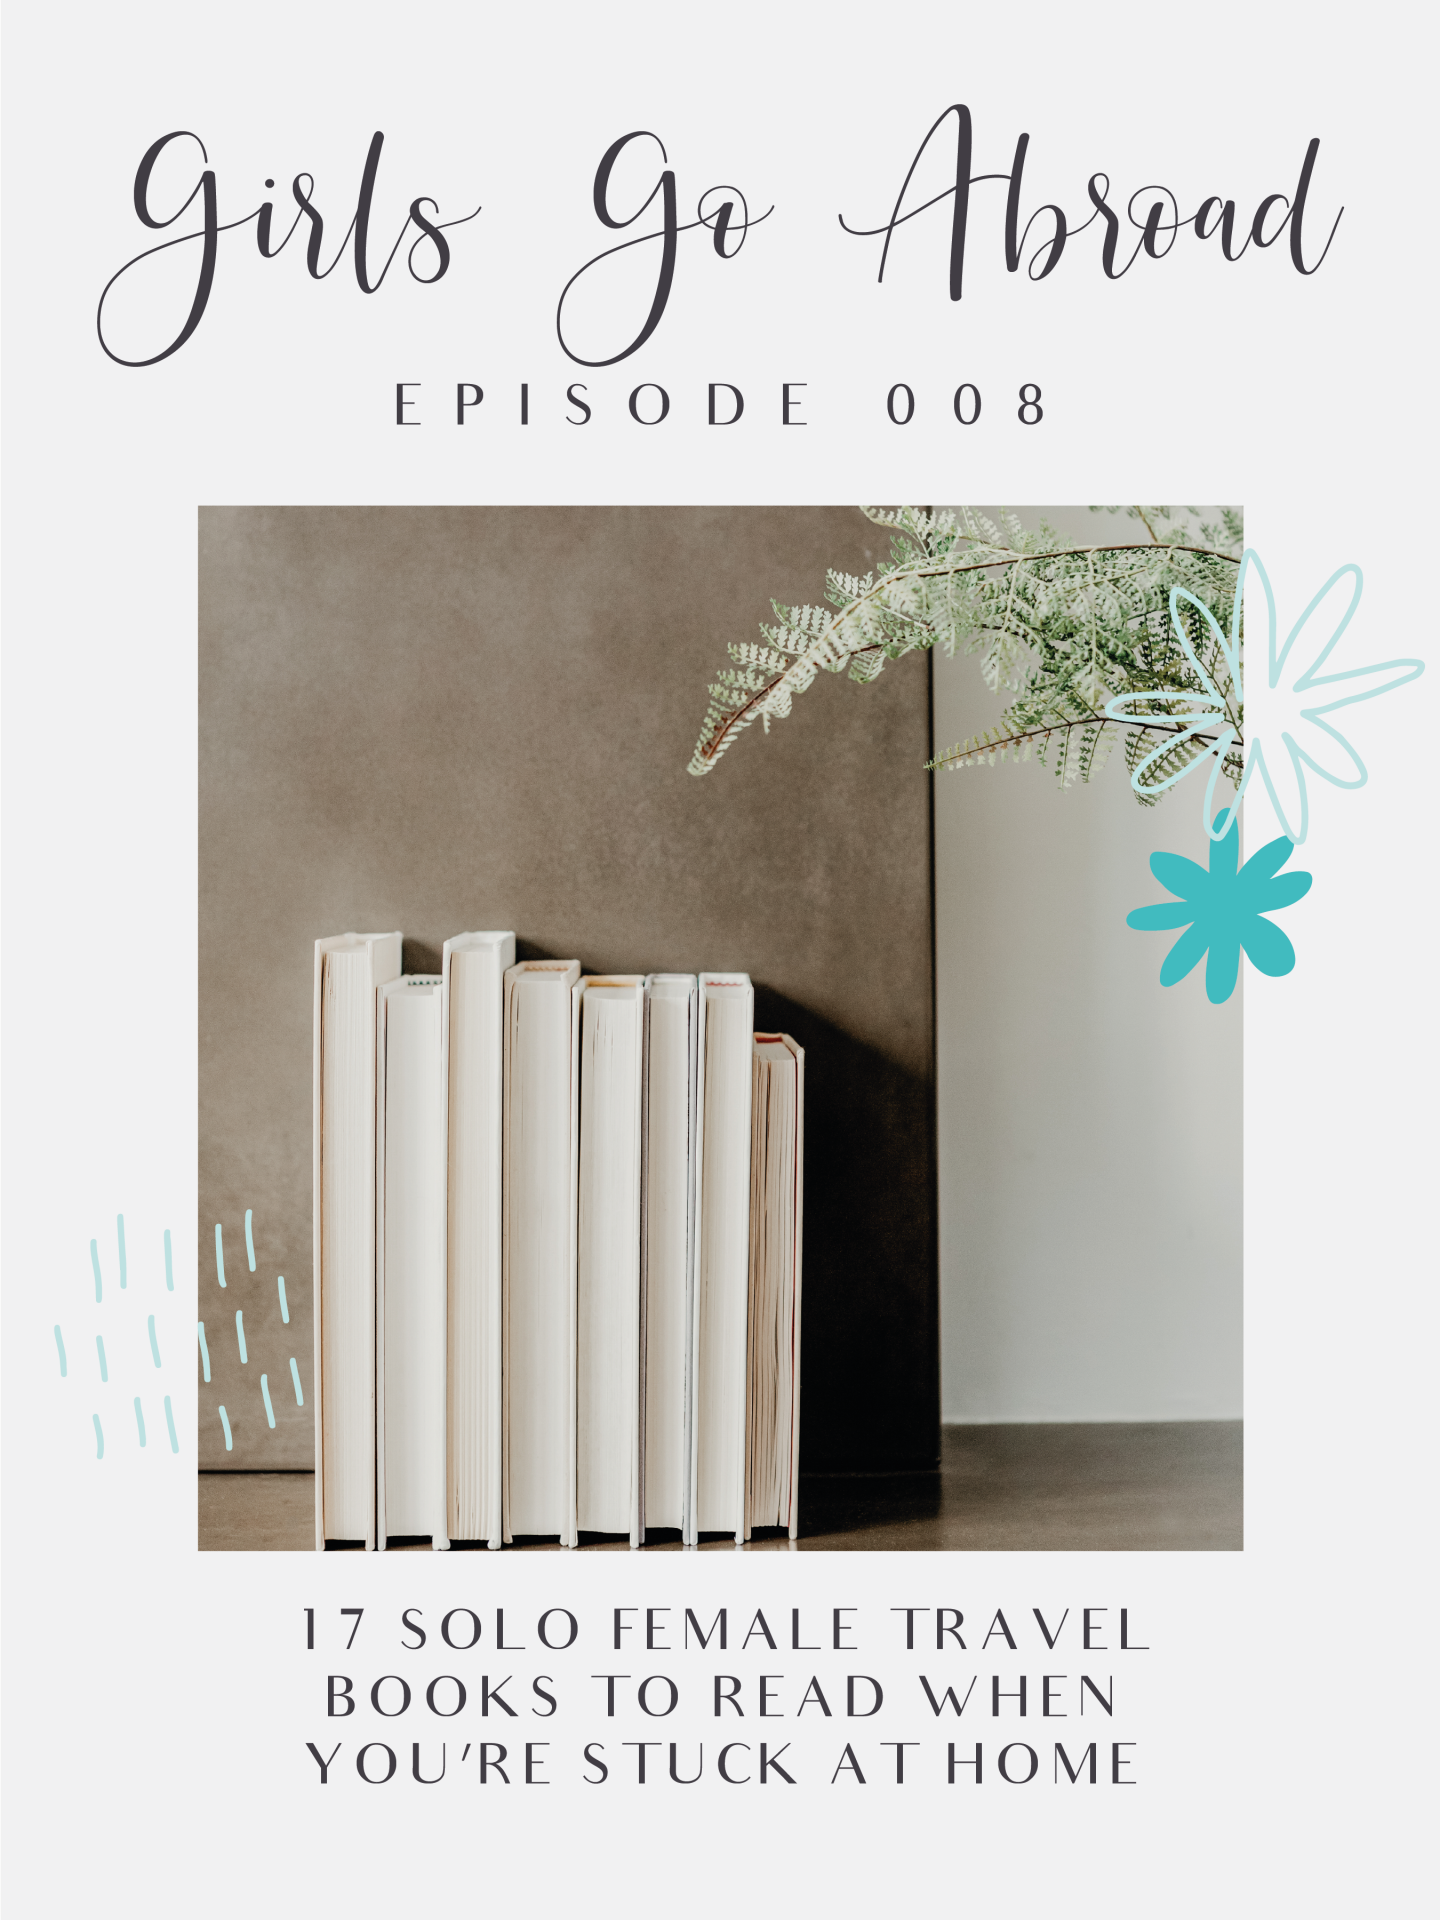 If you're looking for something to do when you're stuck at home and missing travel, then you need to read these 17 solo female travel books! They include Eat, Pray, Love, Wild, and more! #travel #books